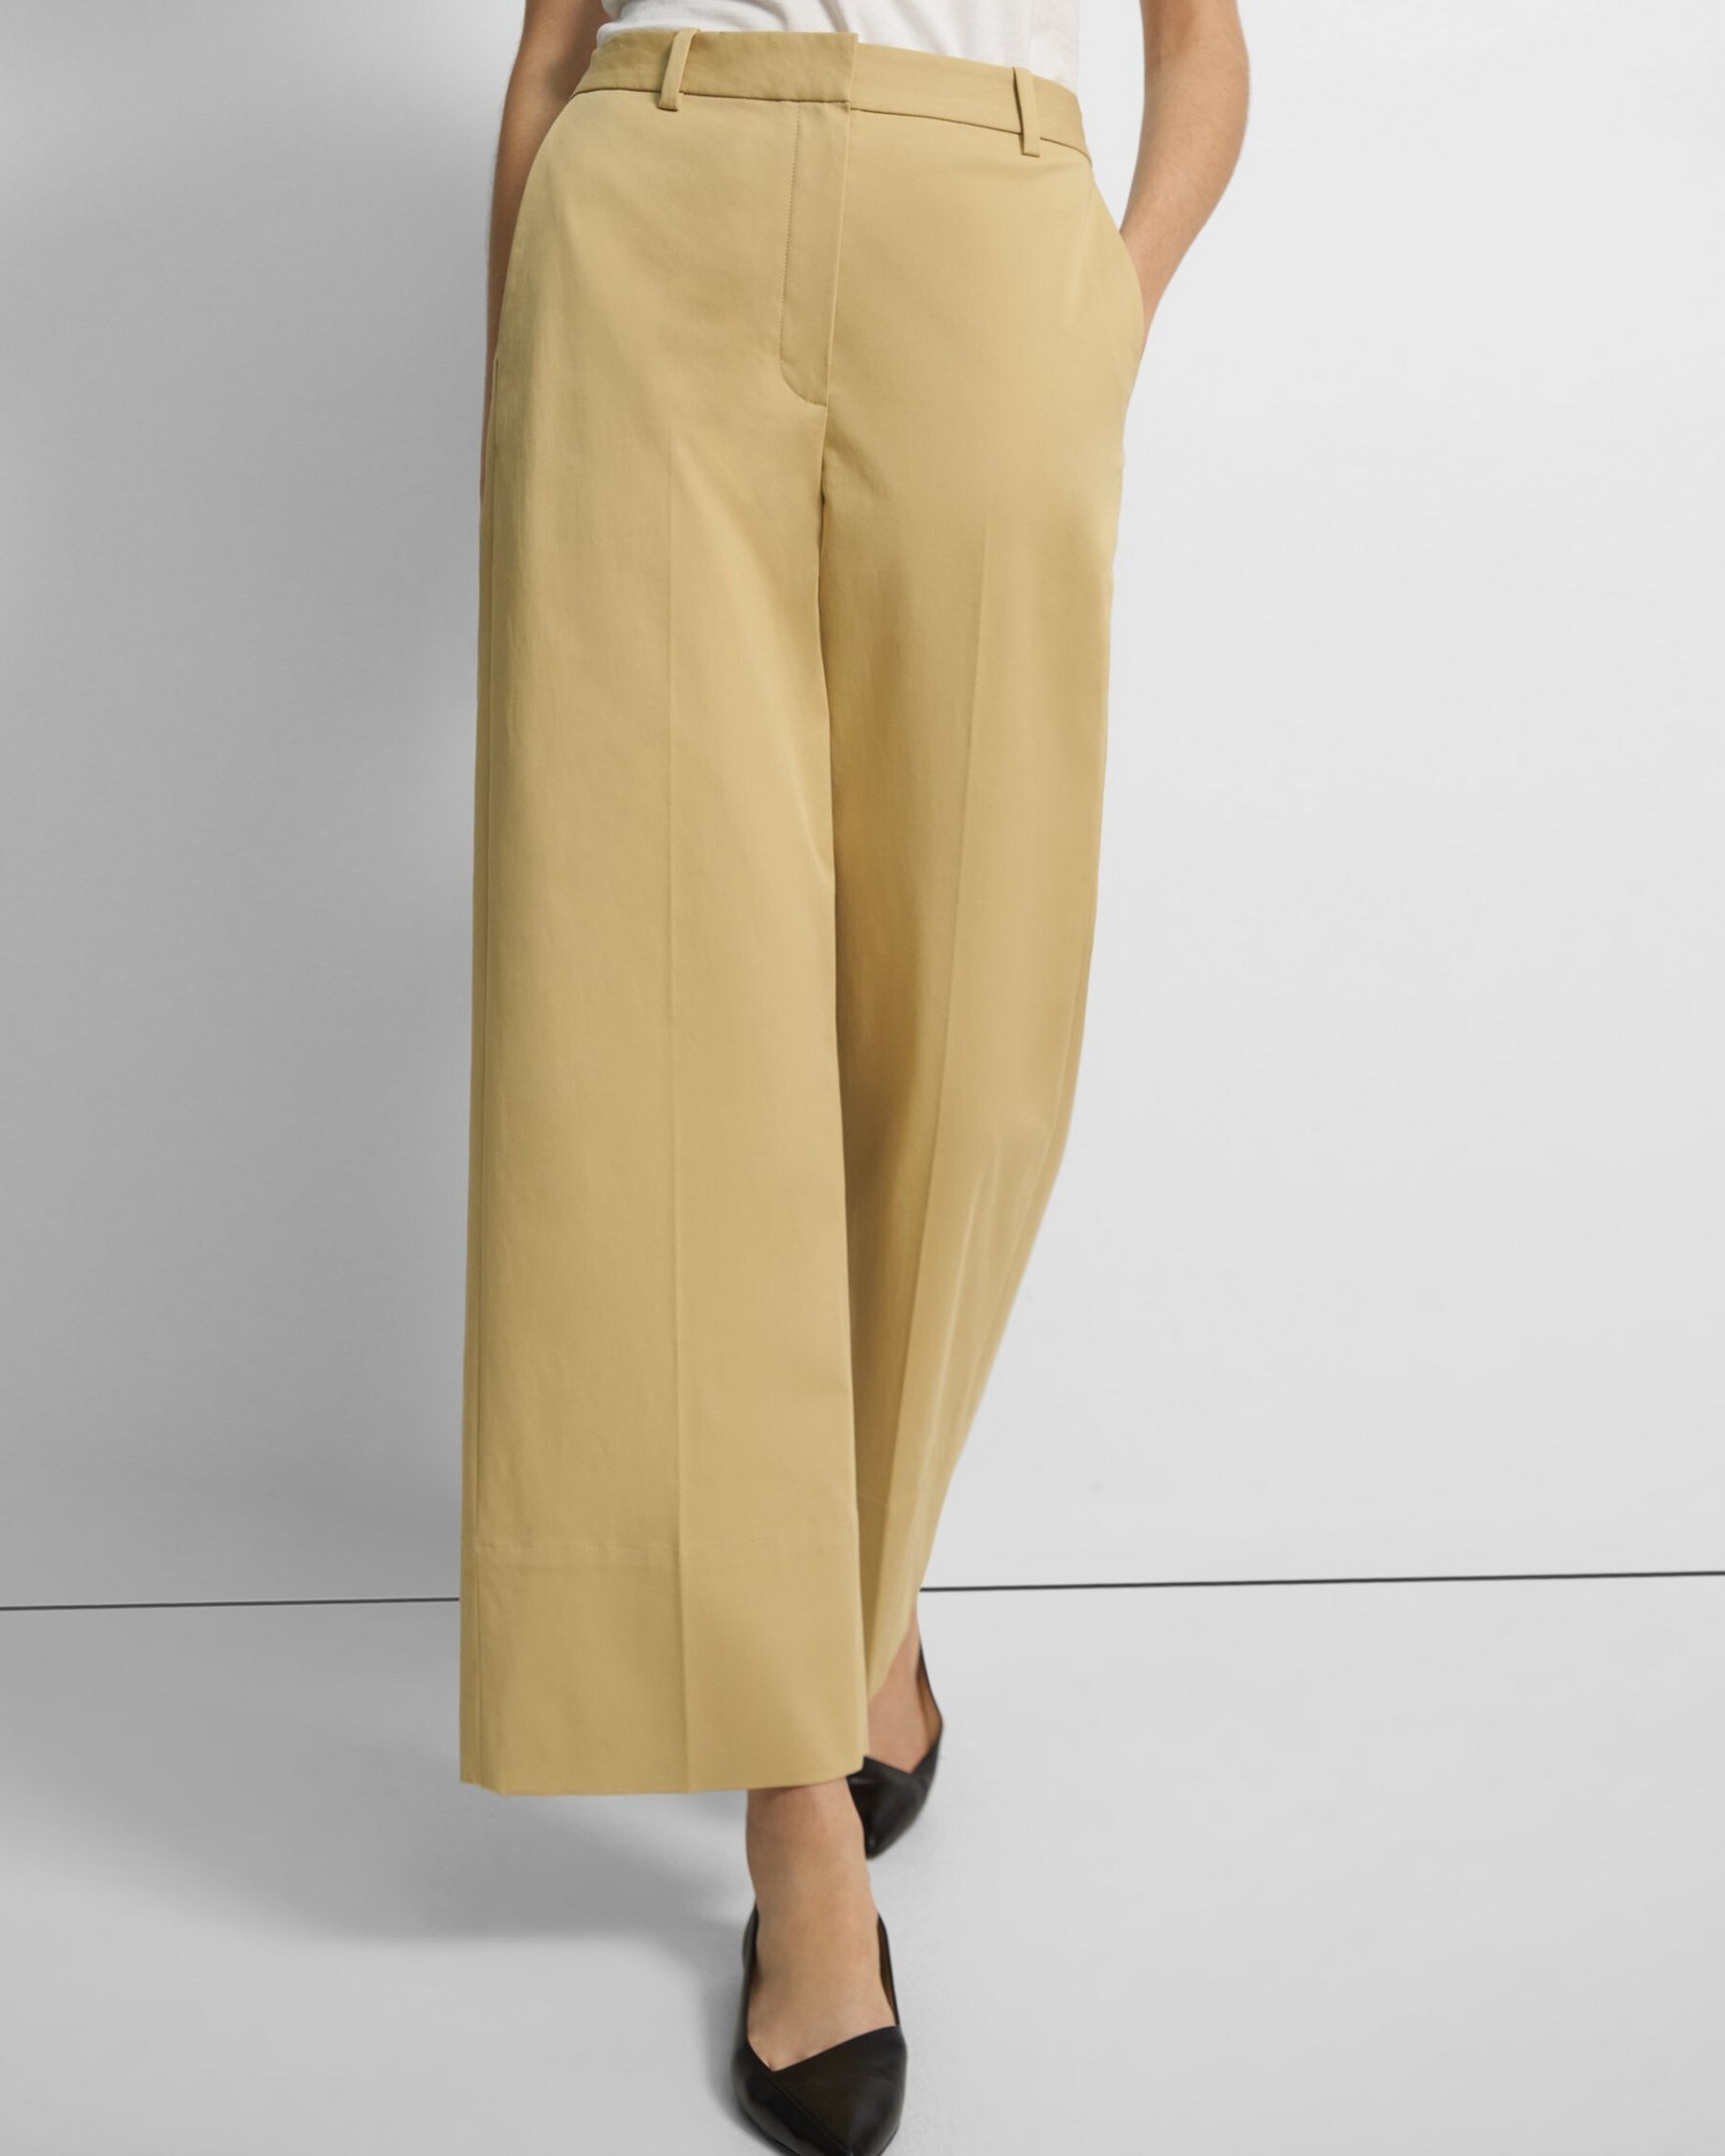 RELAXED TROUSER